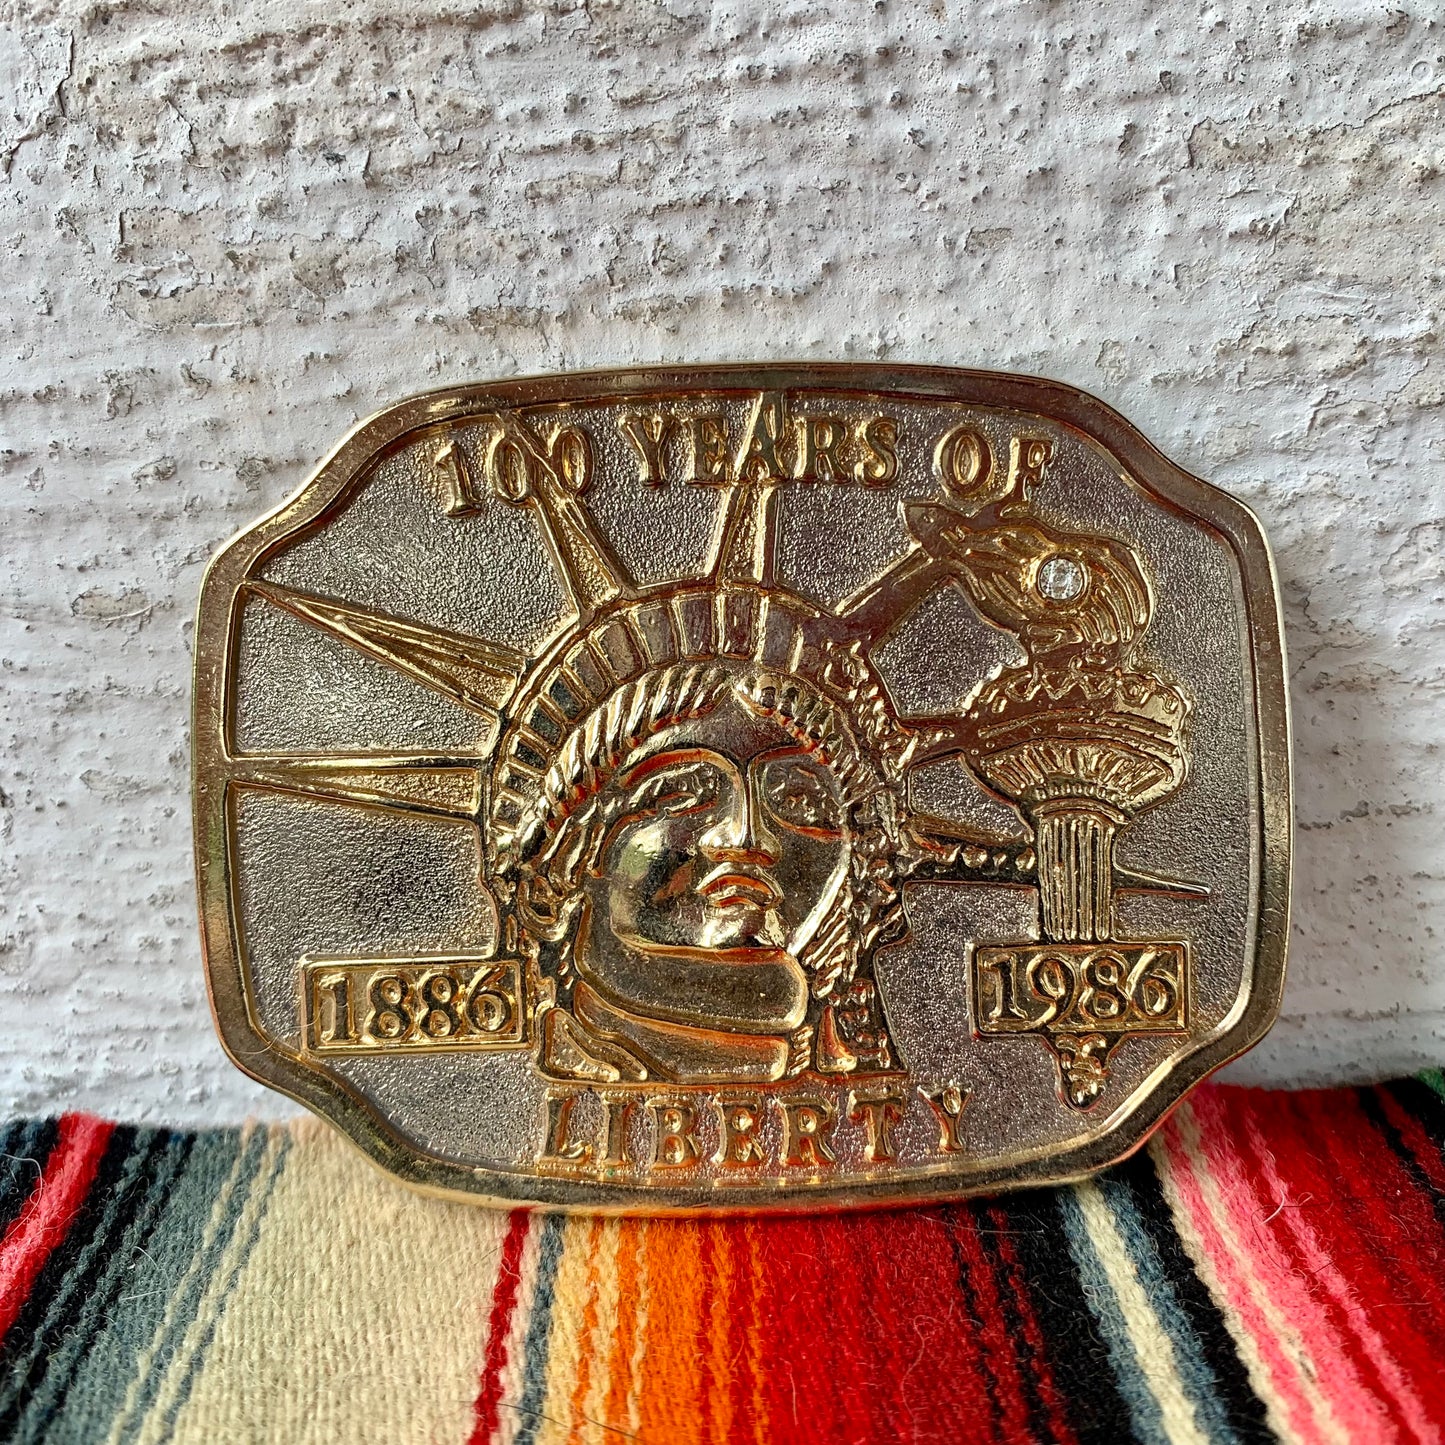 Statue of Liberty Buckle